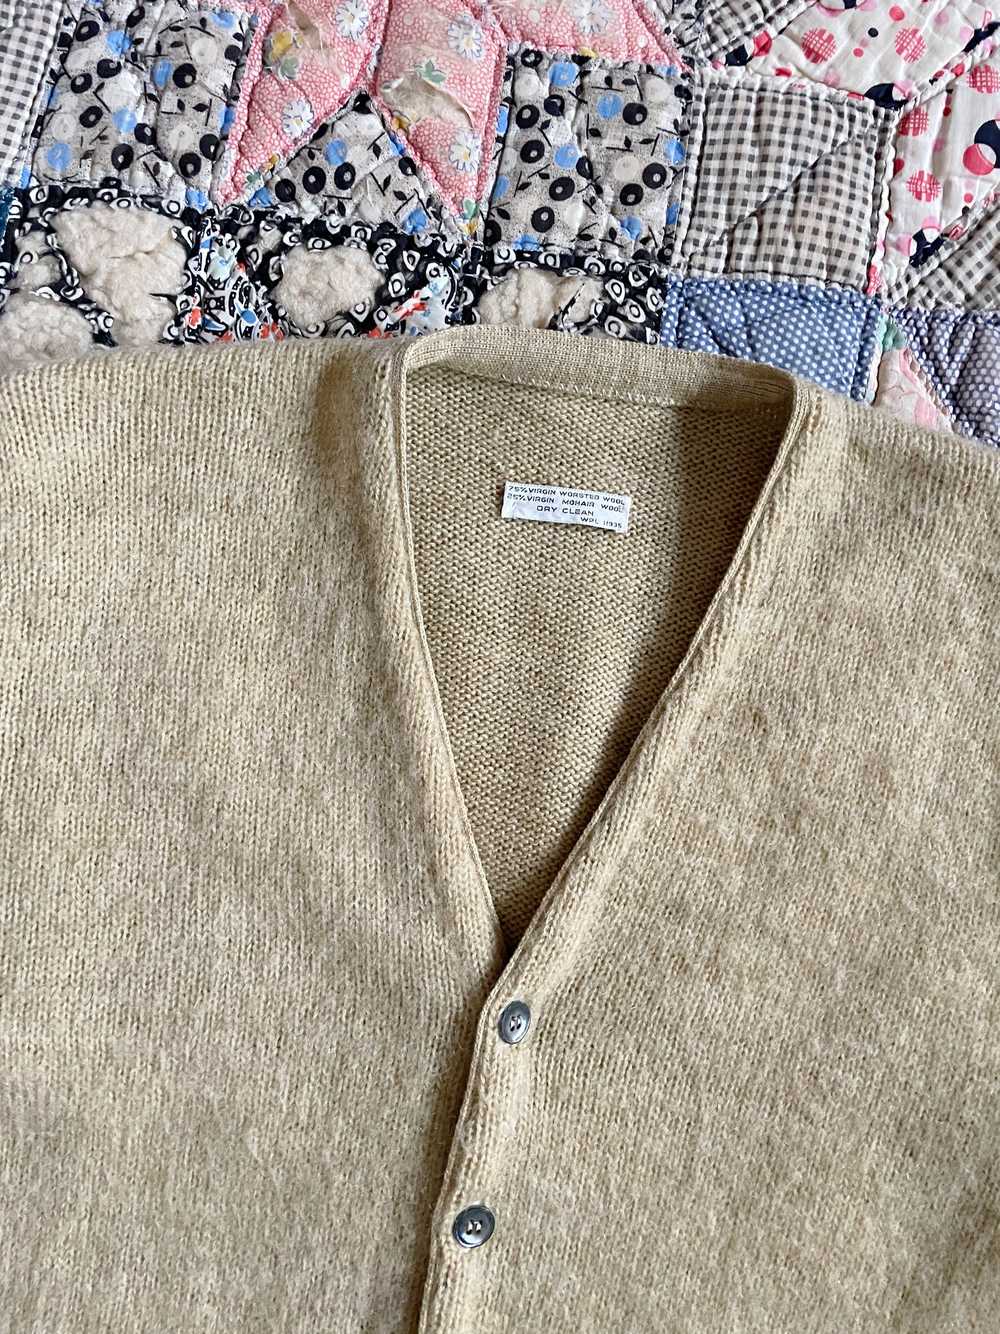 1960s Beige Wool and Mohair Knit Cardigan - image 3